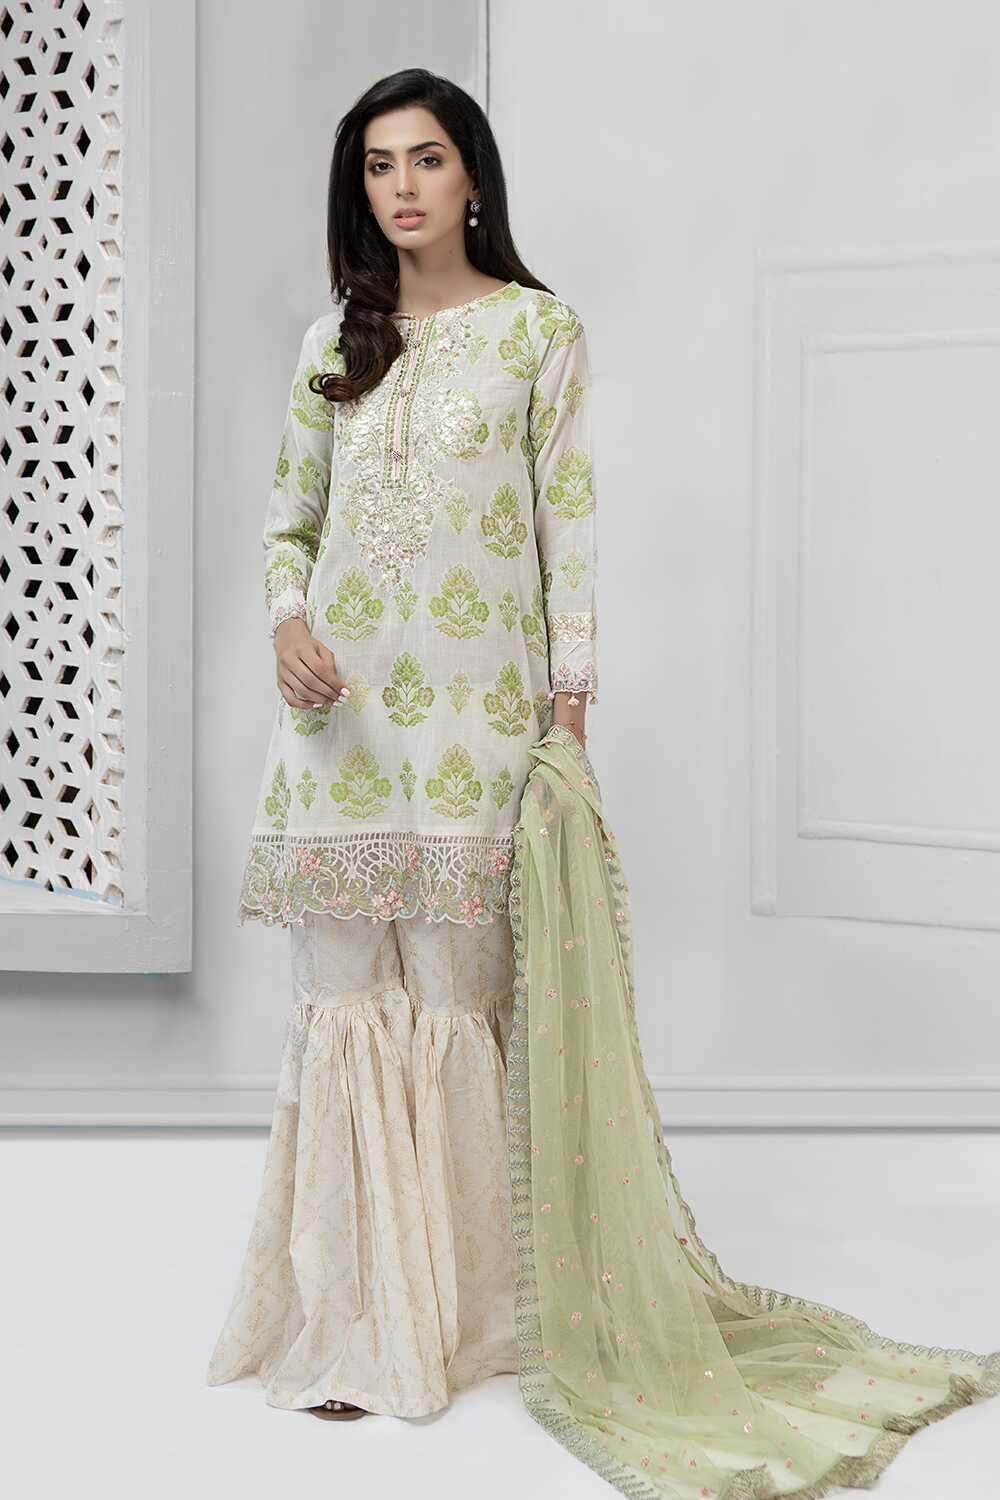 /2019/07/mariab-eid-collection-suit-light-green-dw-2225-image1.jpeg